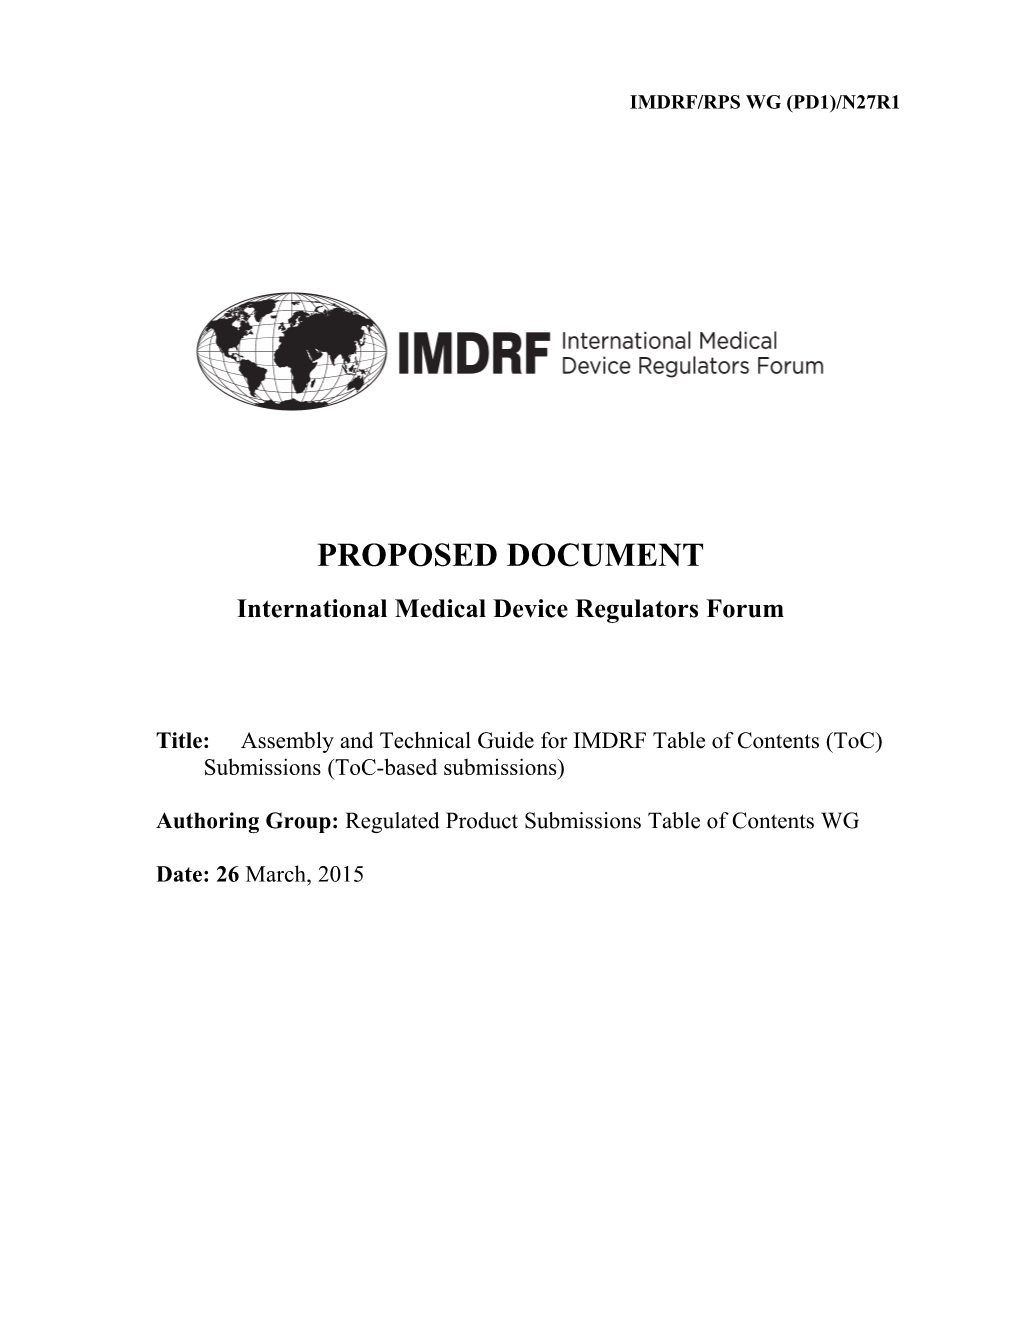 Proposed Document: Assembly and Technical Guide for IMDRF Table of Contents (Toc) Submissions